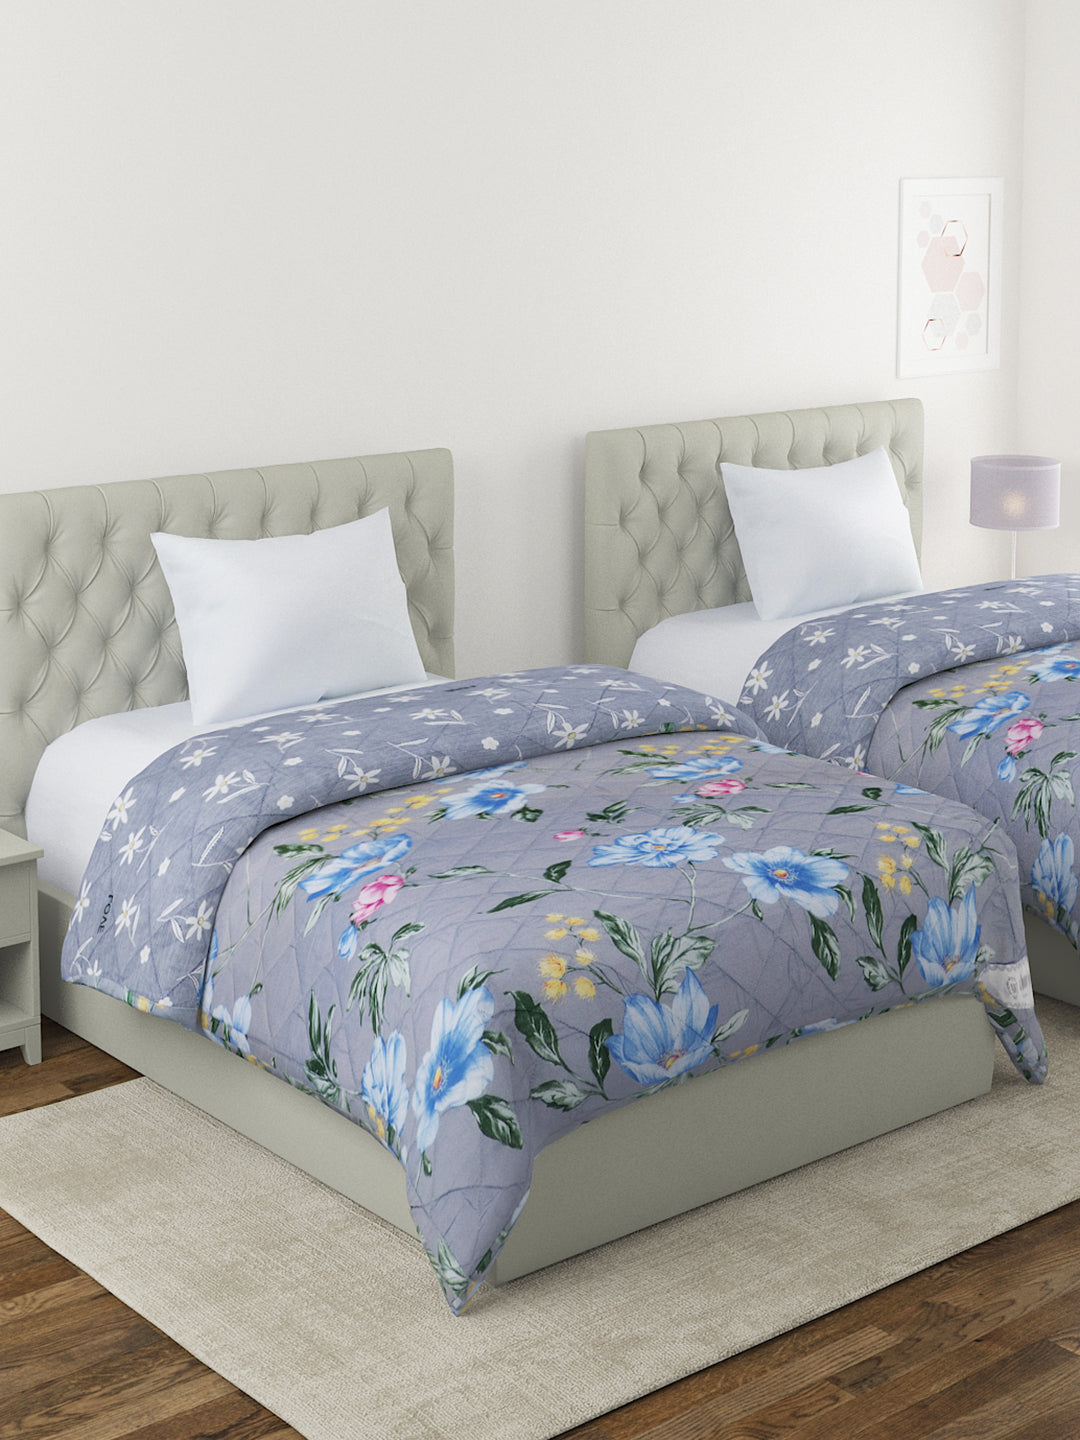 Floral Print Set of 2 Single Bed Light Weight Comforter-Grey and Blue